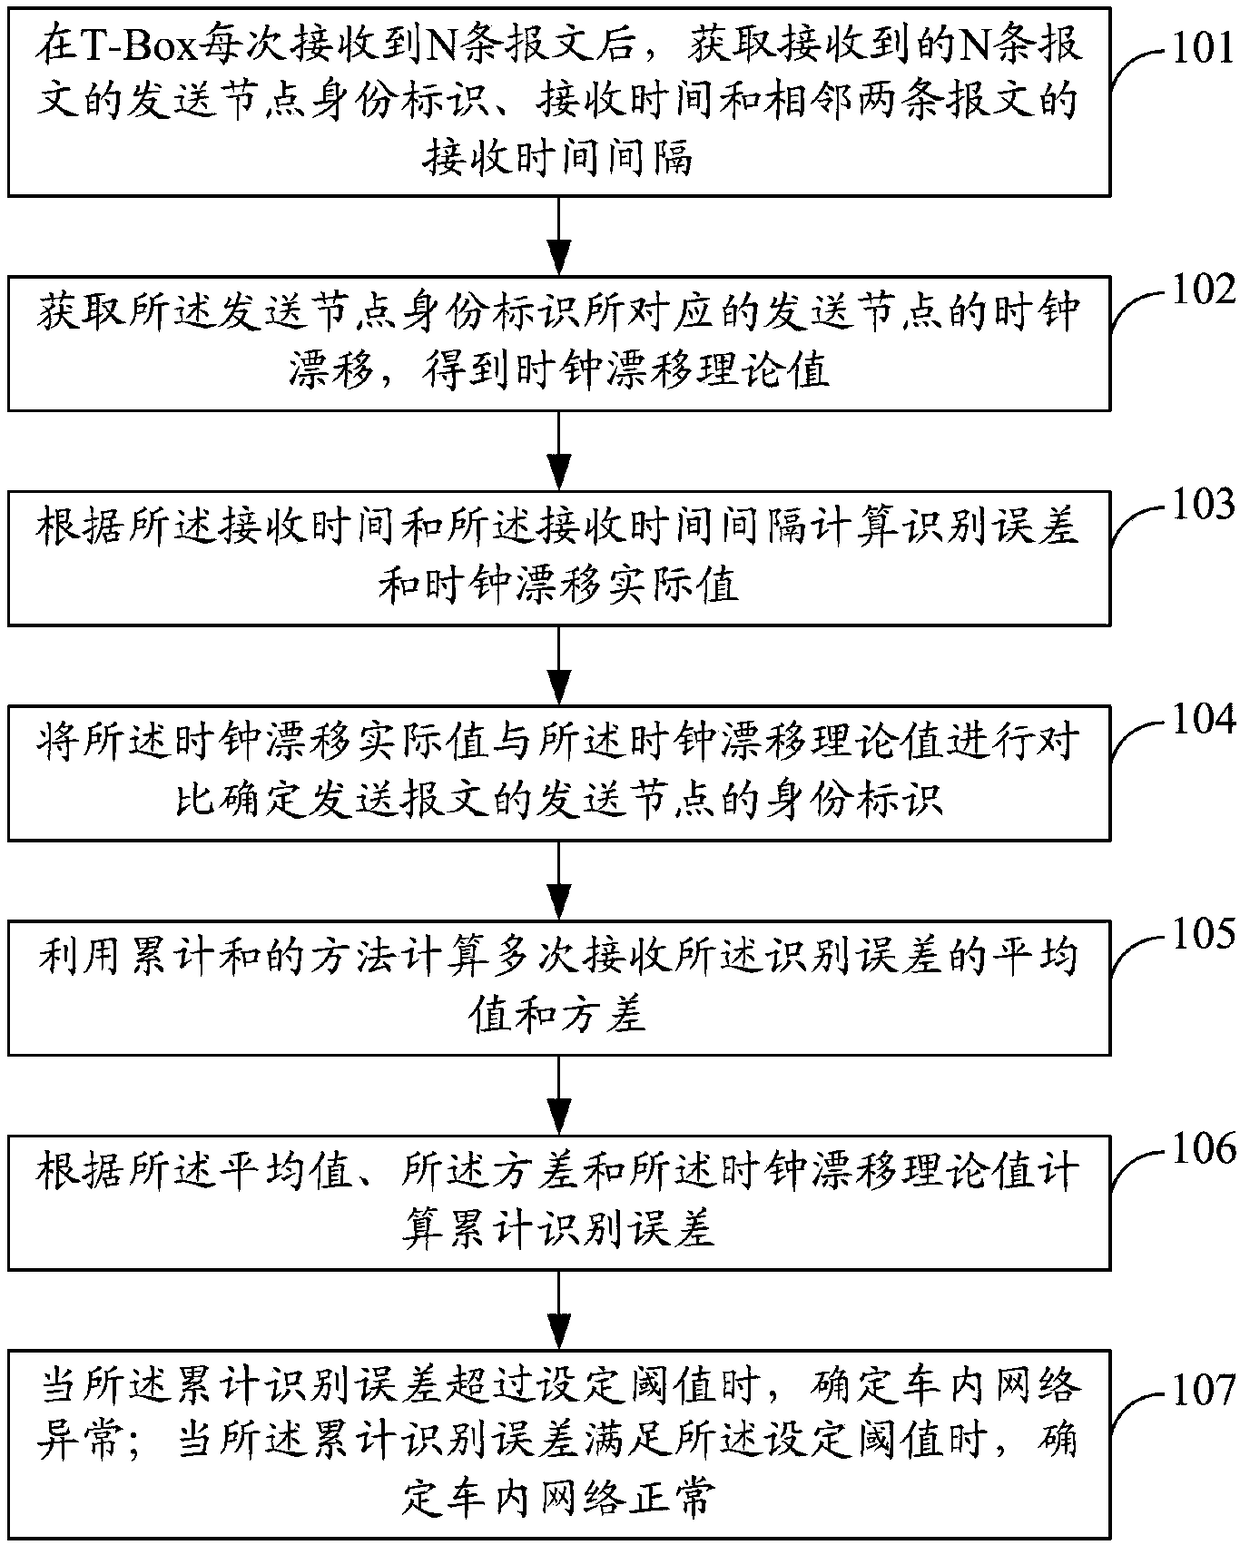 In-vehicle network invasion detection method and system